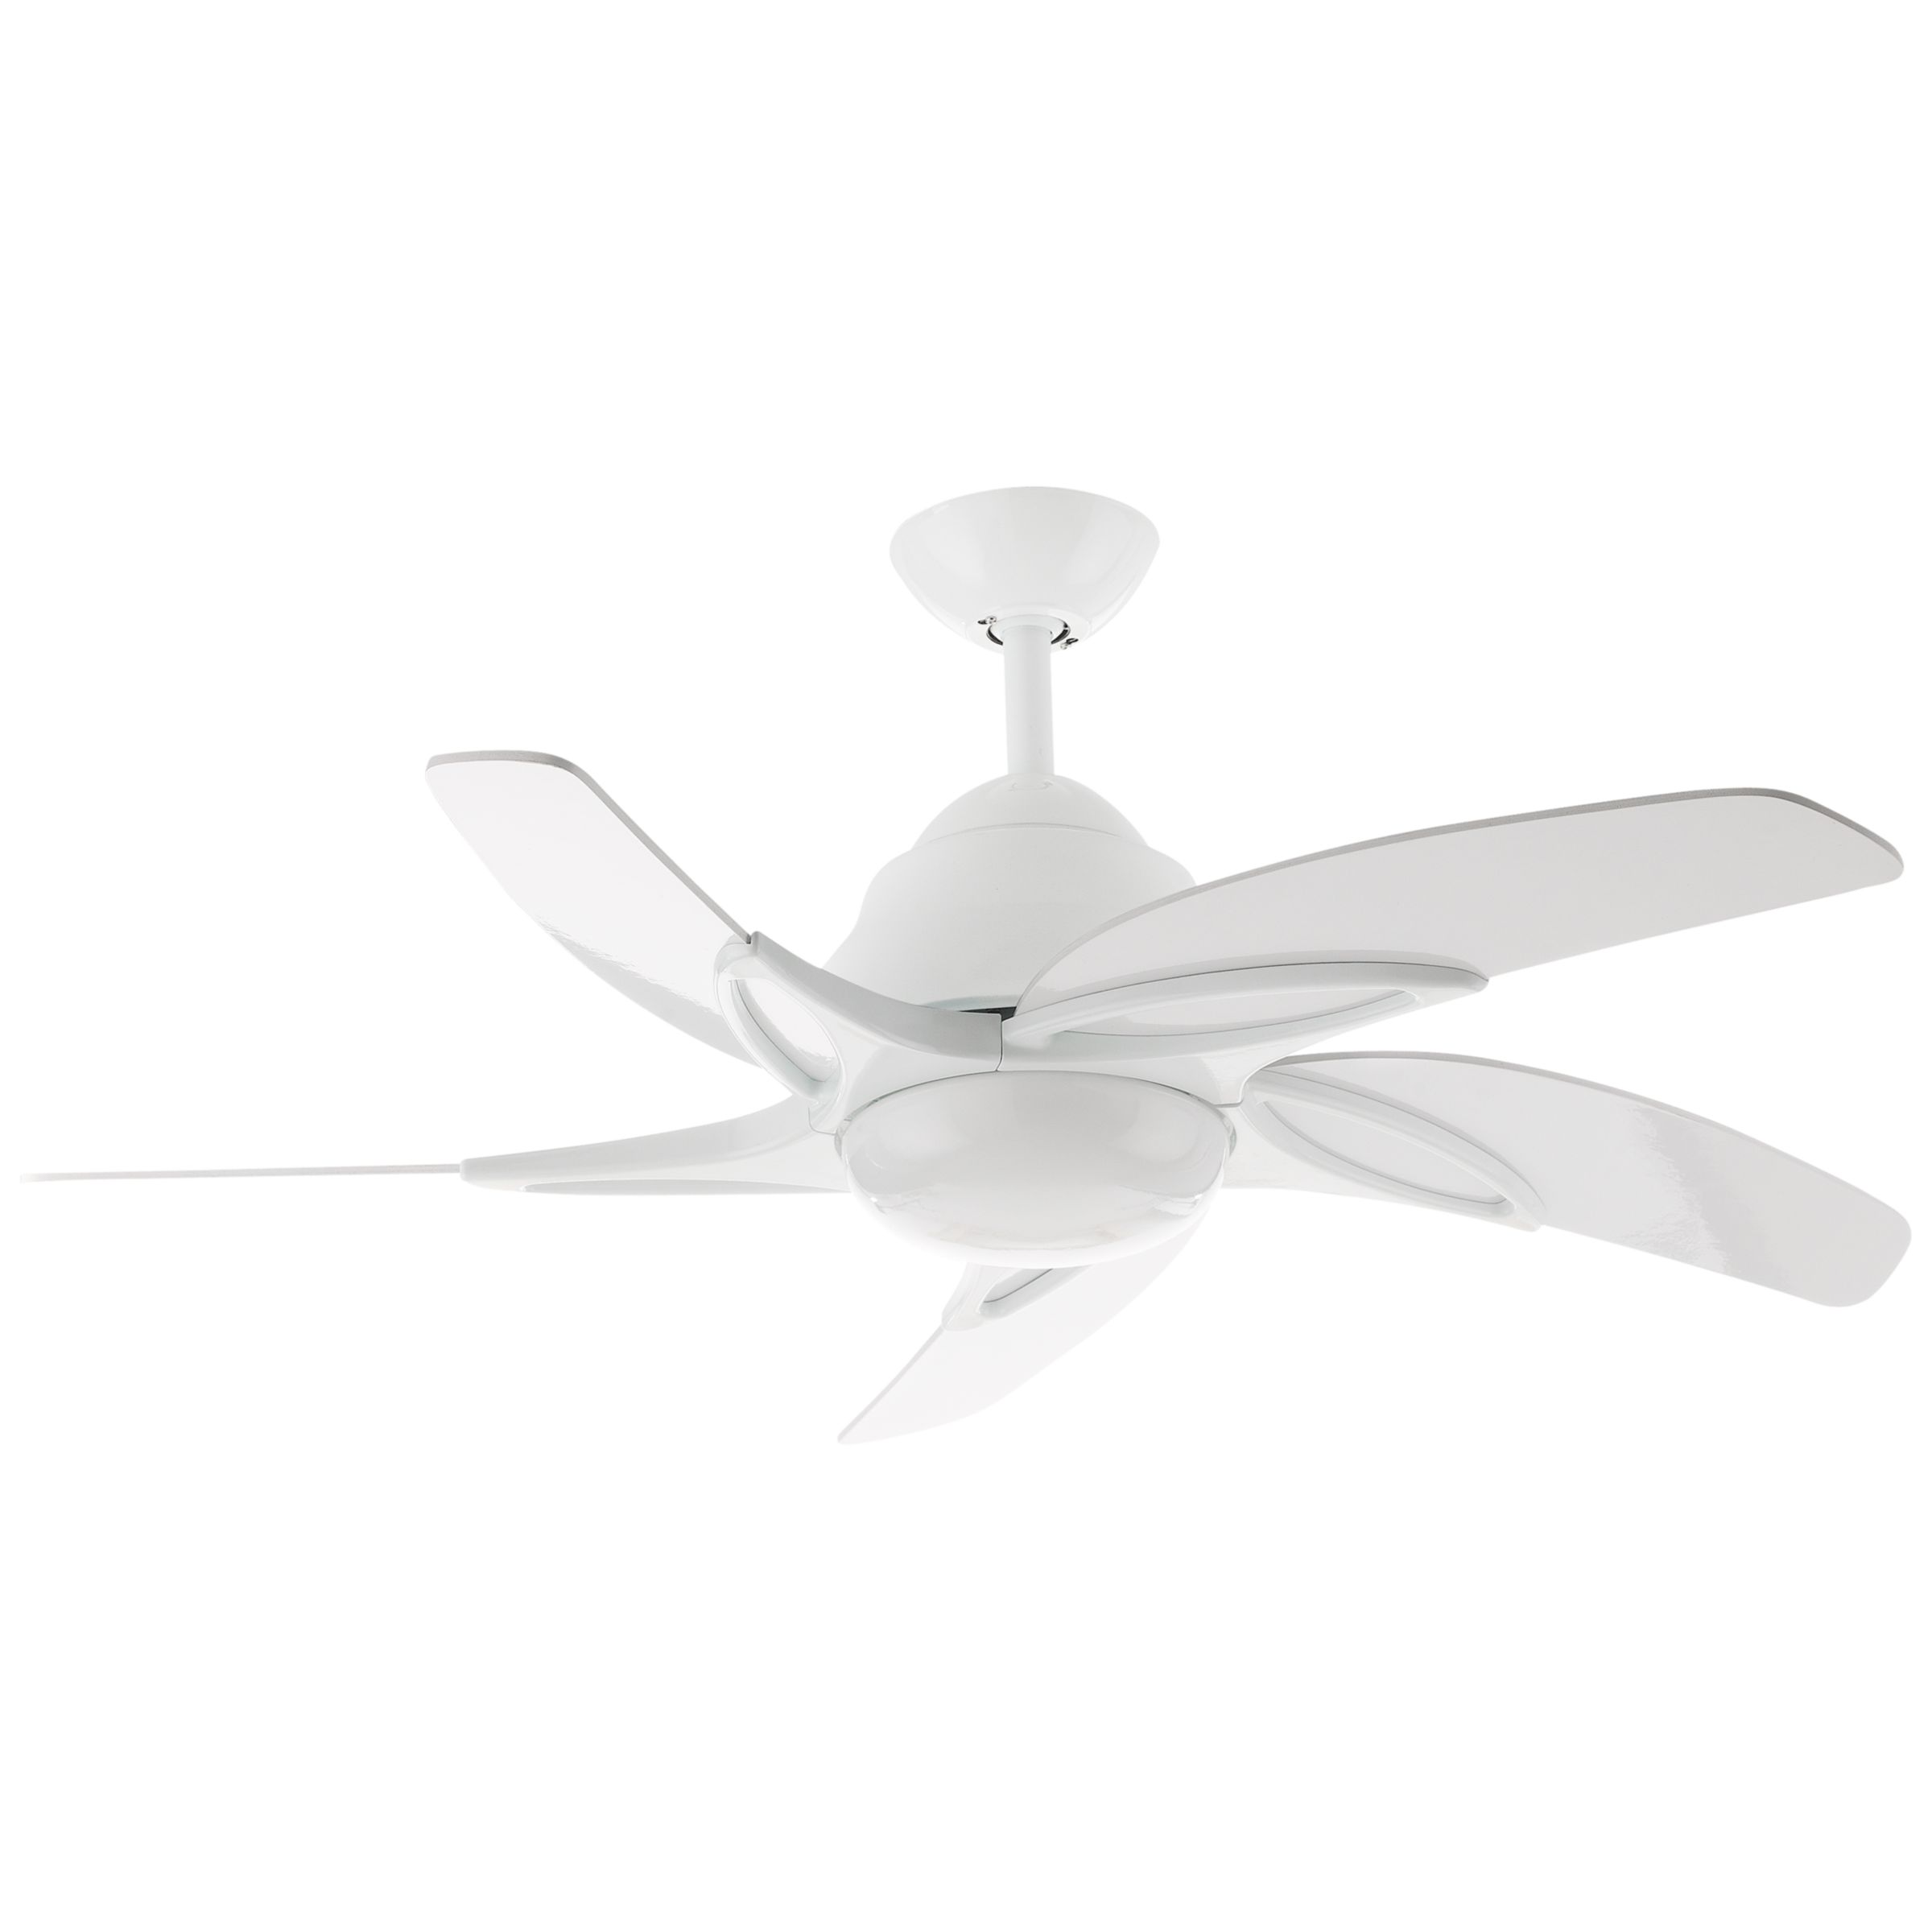 Fantasia Viper Ceiling Fan and Light at John Lewis